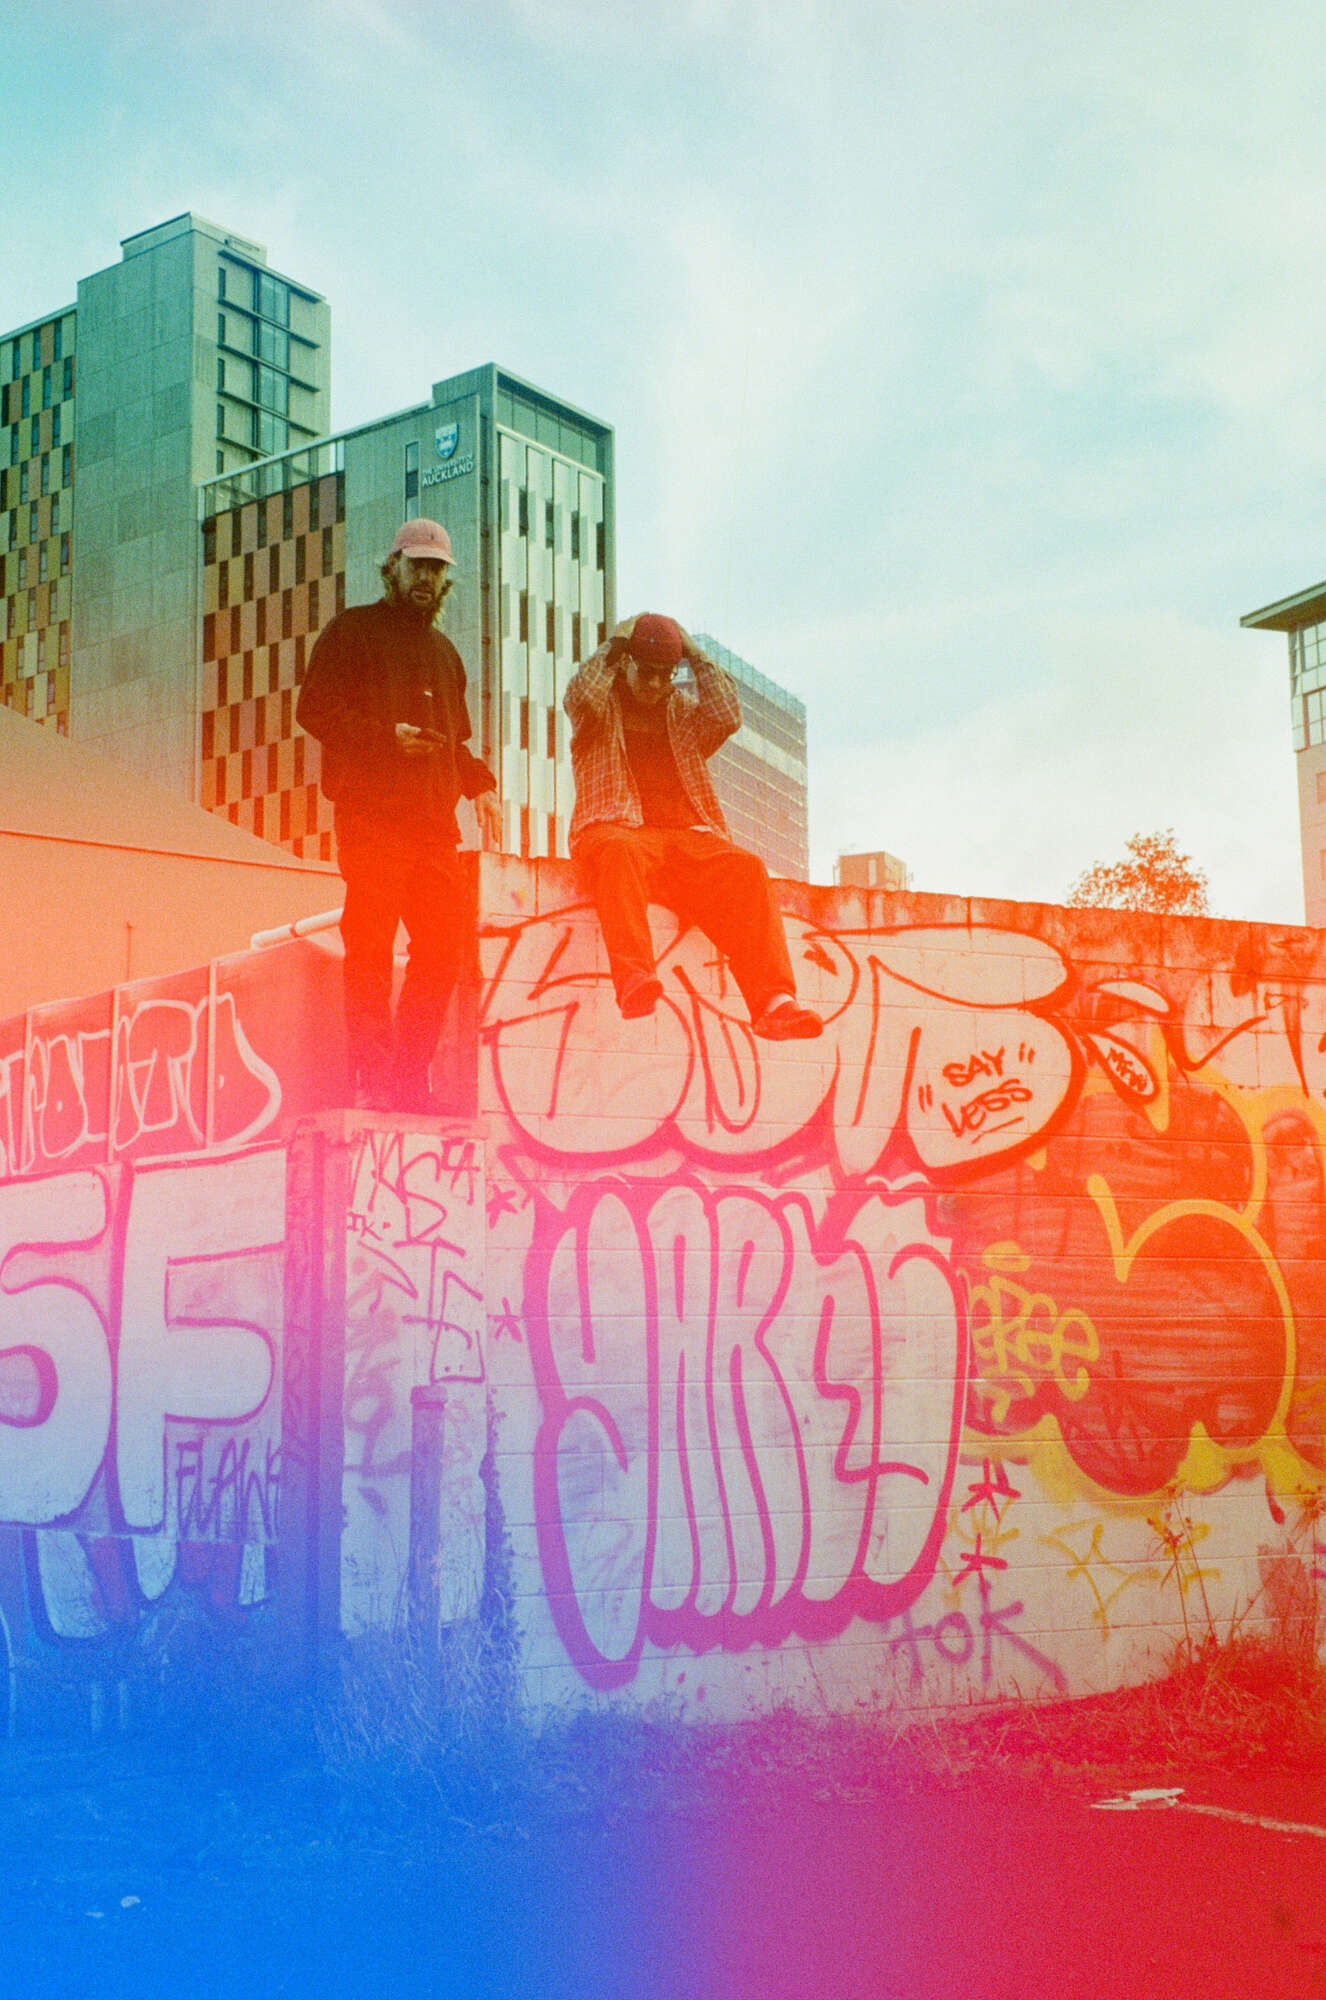 Members of the hip-hop group No Comply sitting on a wall in an urban environment. There's graffiti on the wall. The photo has a light leak and grainy quality to it.